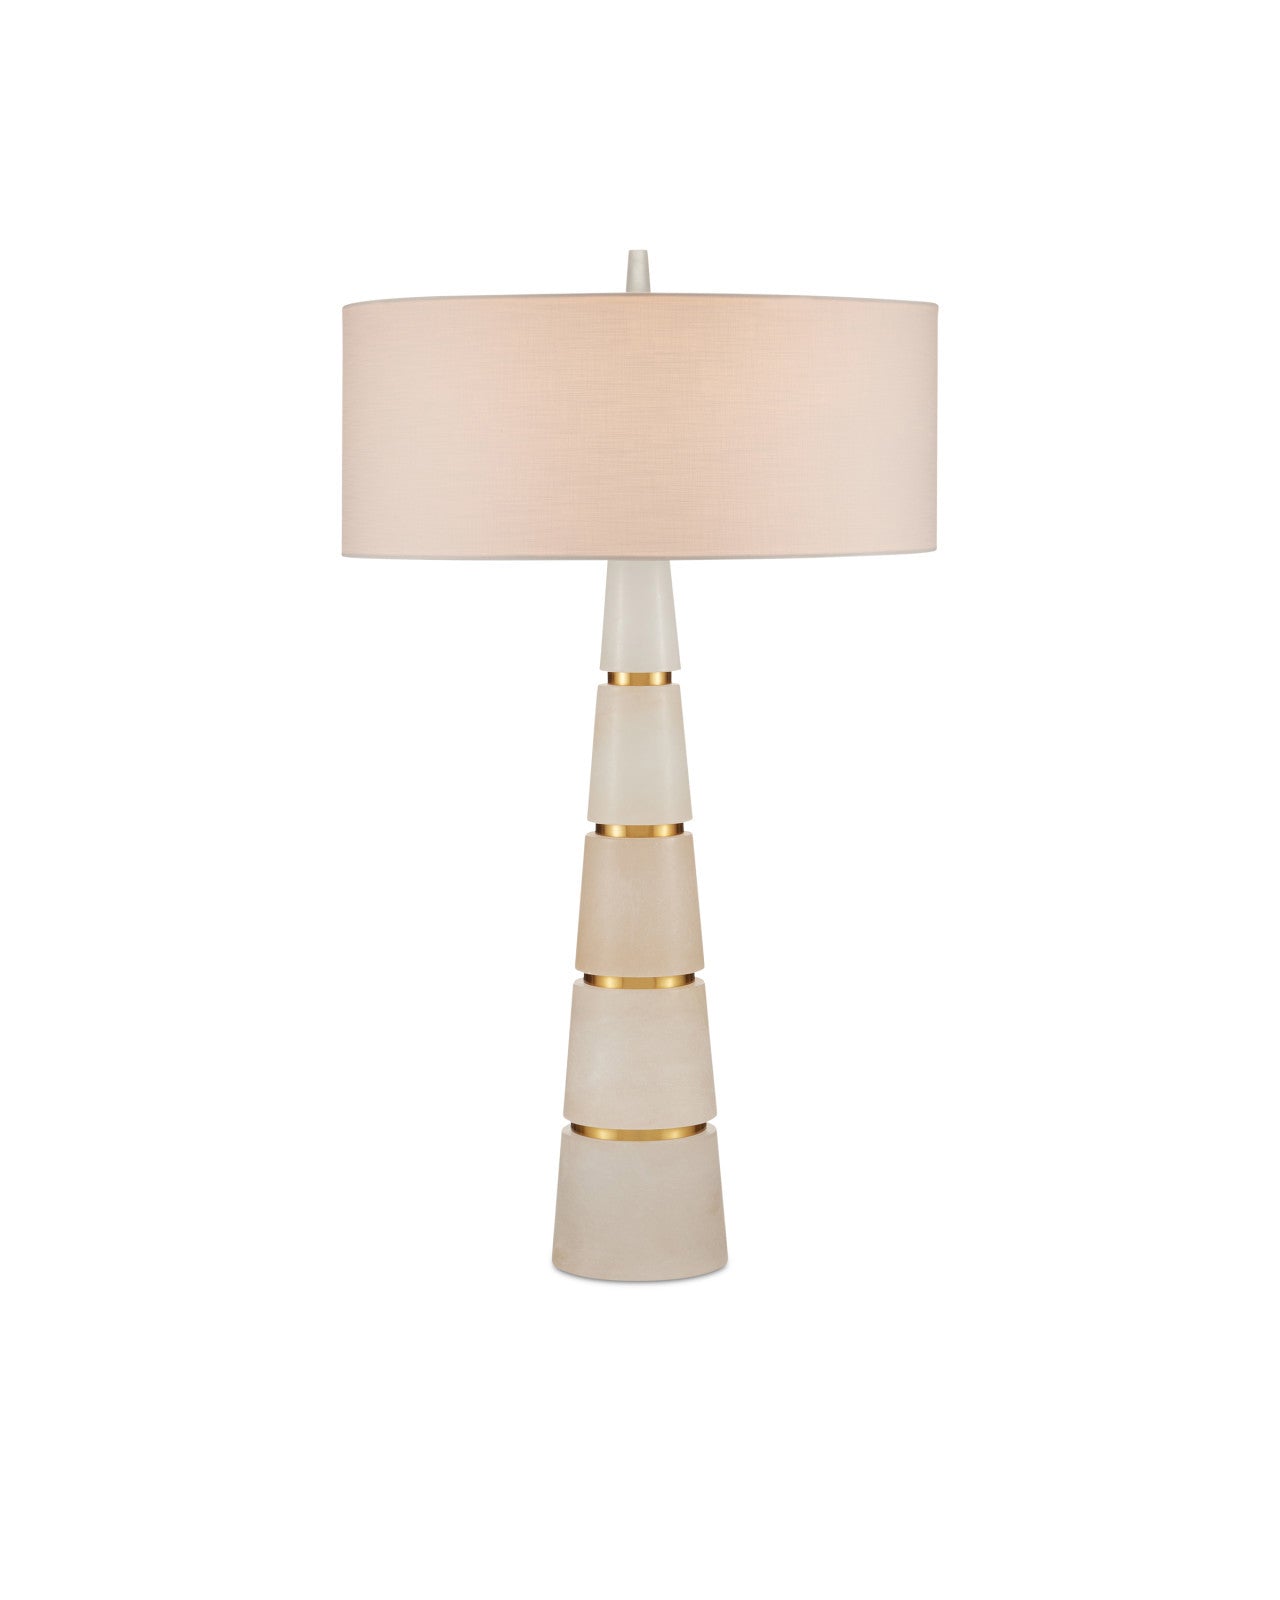 Eleanora Table Lamp by Currey & Company